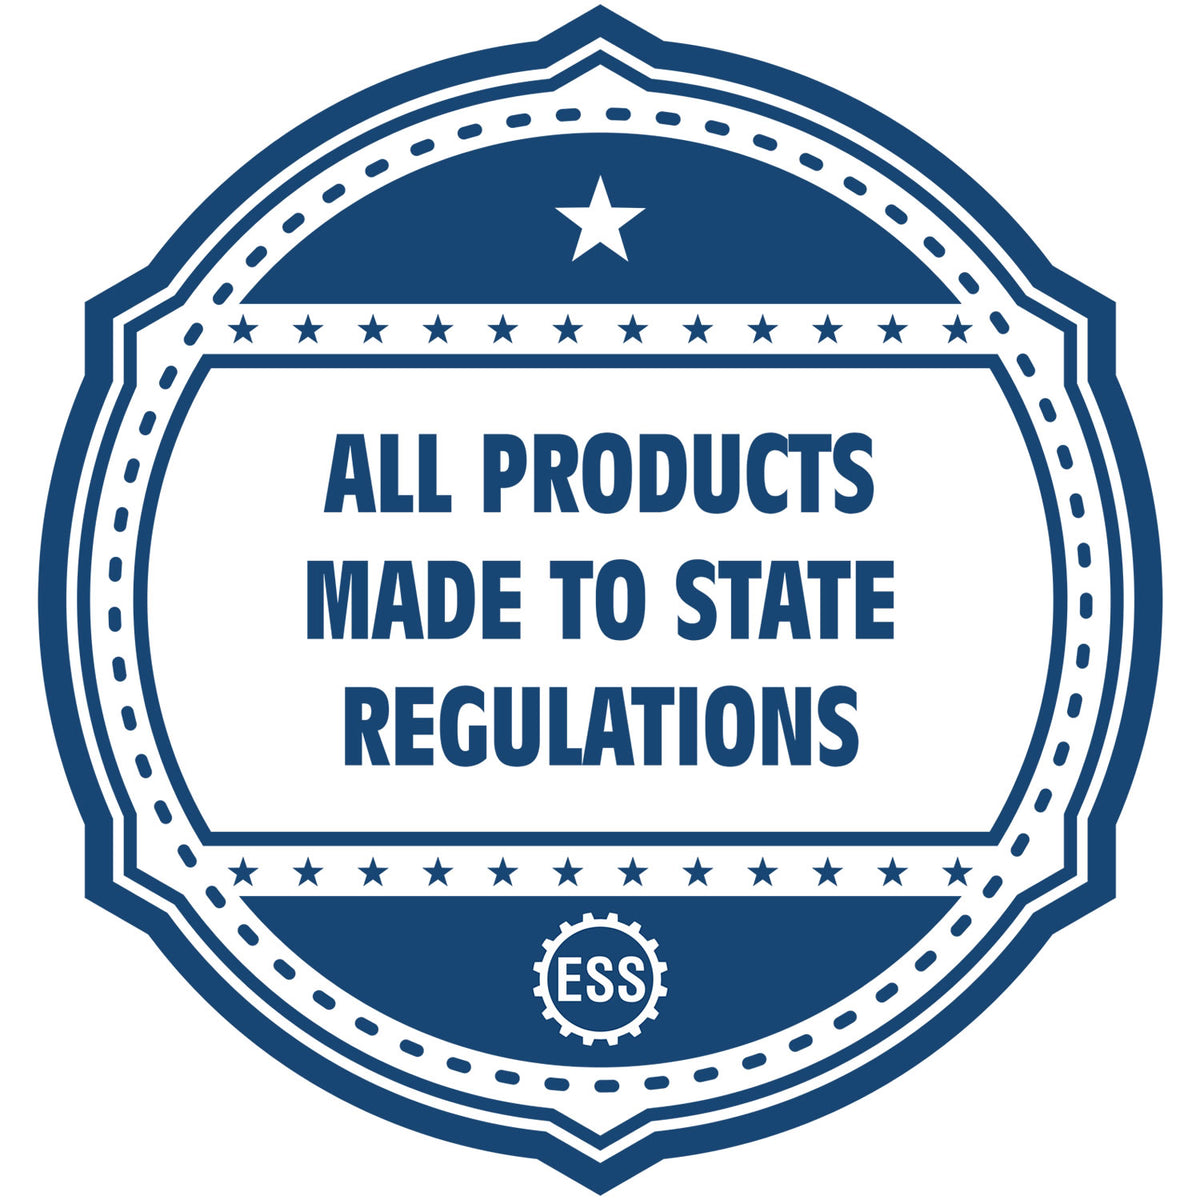 An icon or badge element for the Slim Pre-Inked Texas Professional Engineer Seal Stamp showing that this product is made in compliance with state regulations.